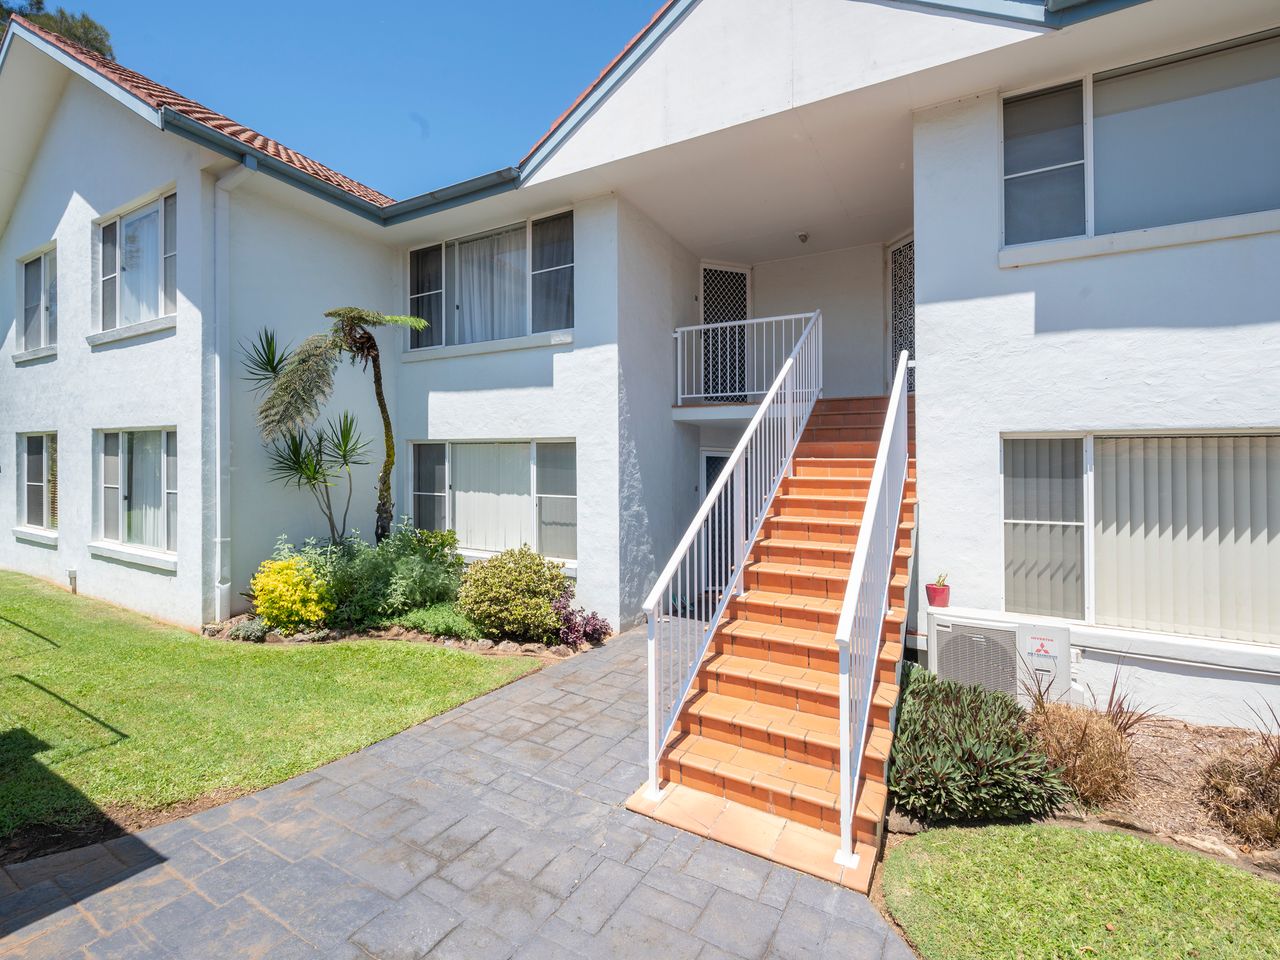 Property Image 2 - Shearwater, Coffs Harbour